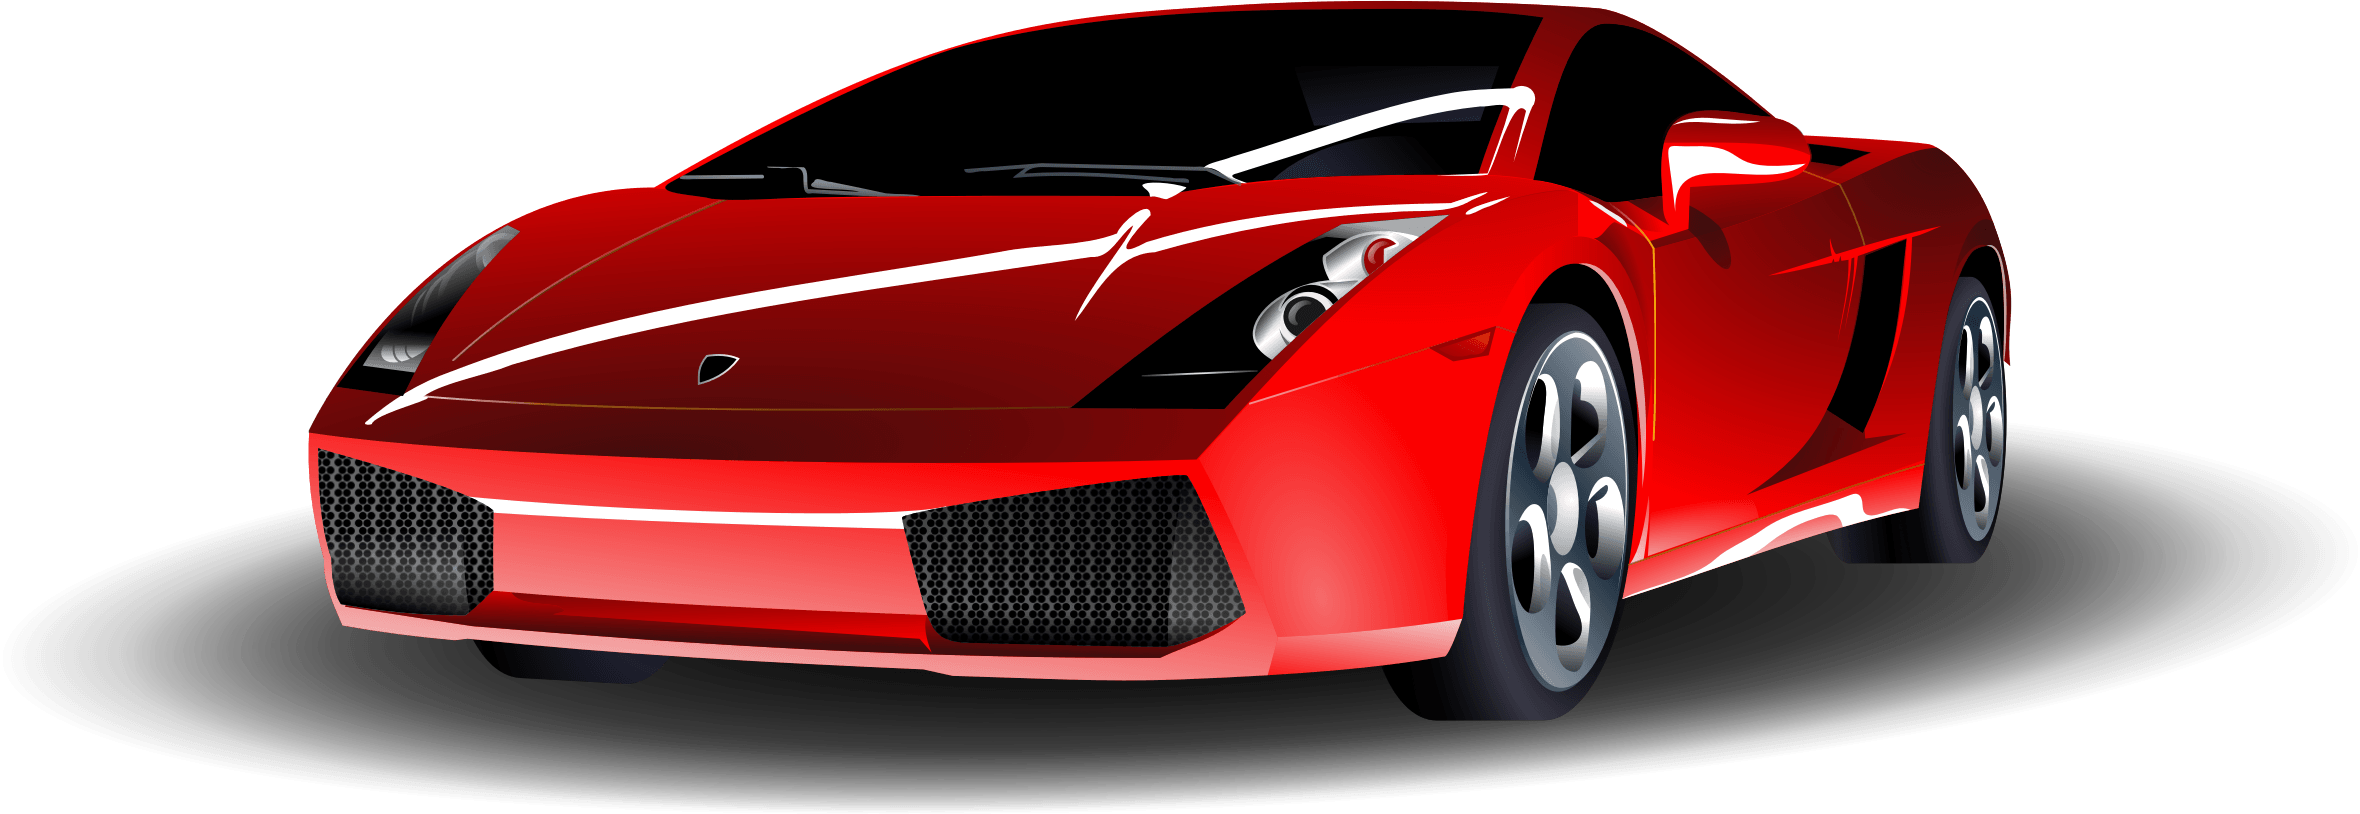 Simple Red Car Logo - Red Sports Car a simple colour change remix of sports